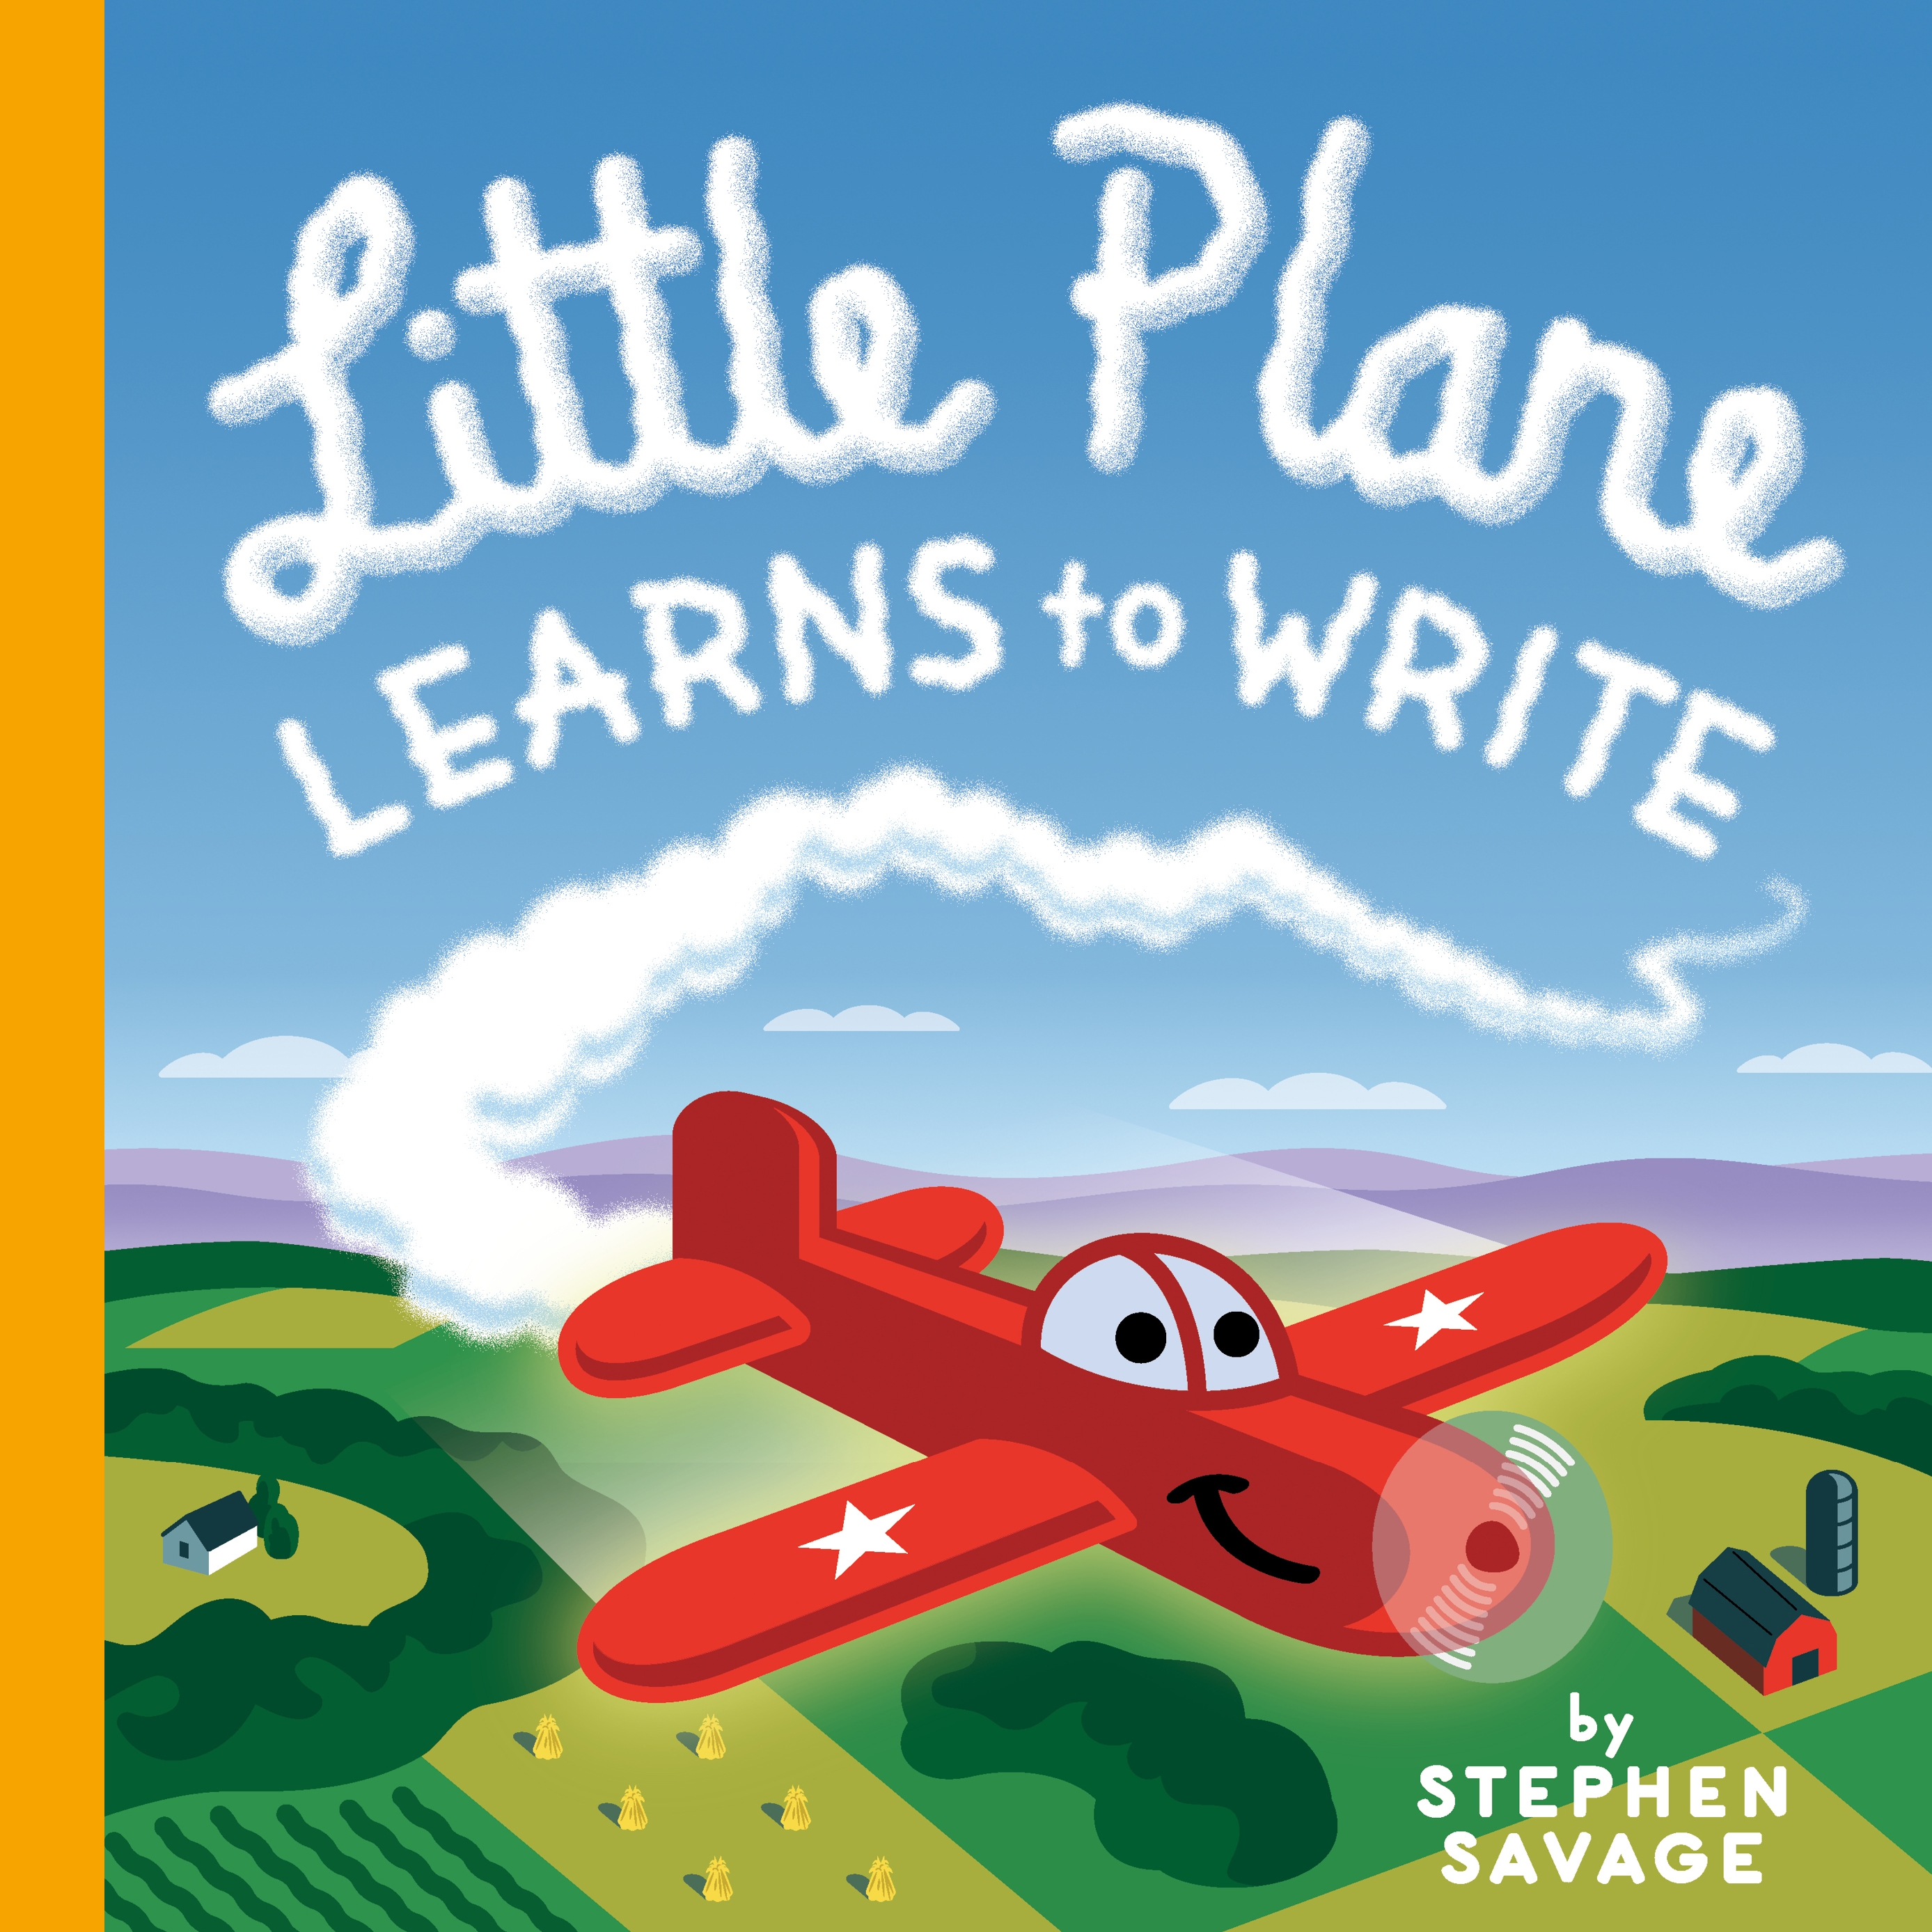 Sunday Story Time with Stephen Savage (Author and Illustrator of Little Plane Learns to Write )